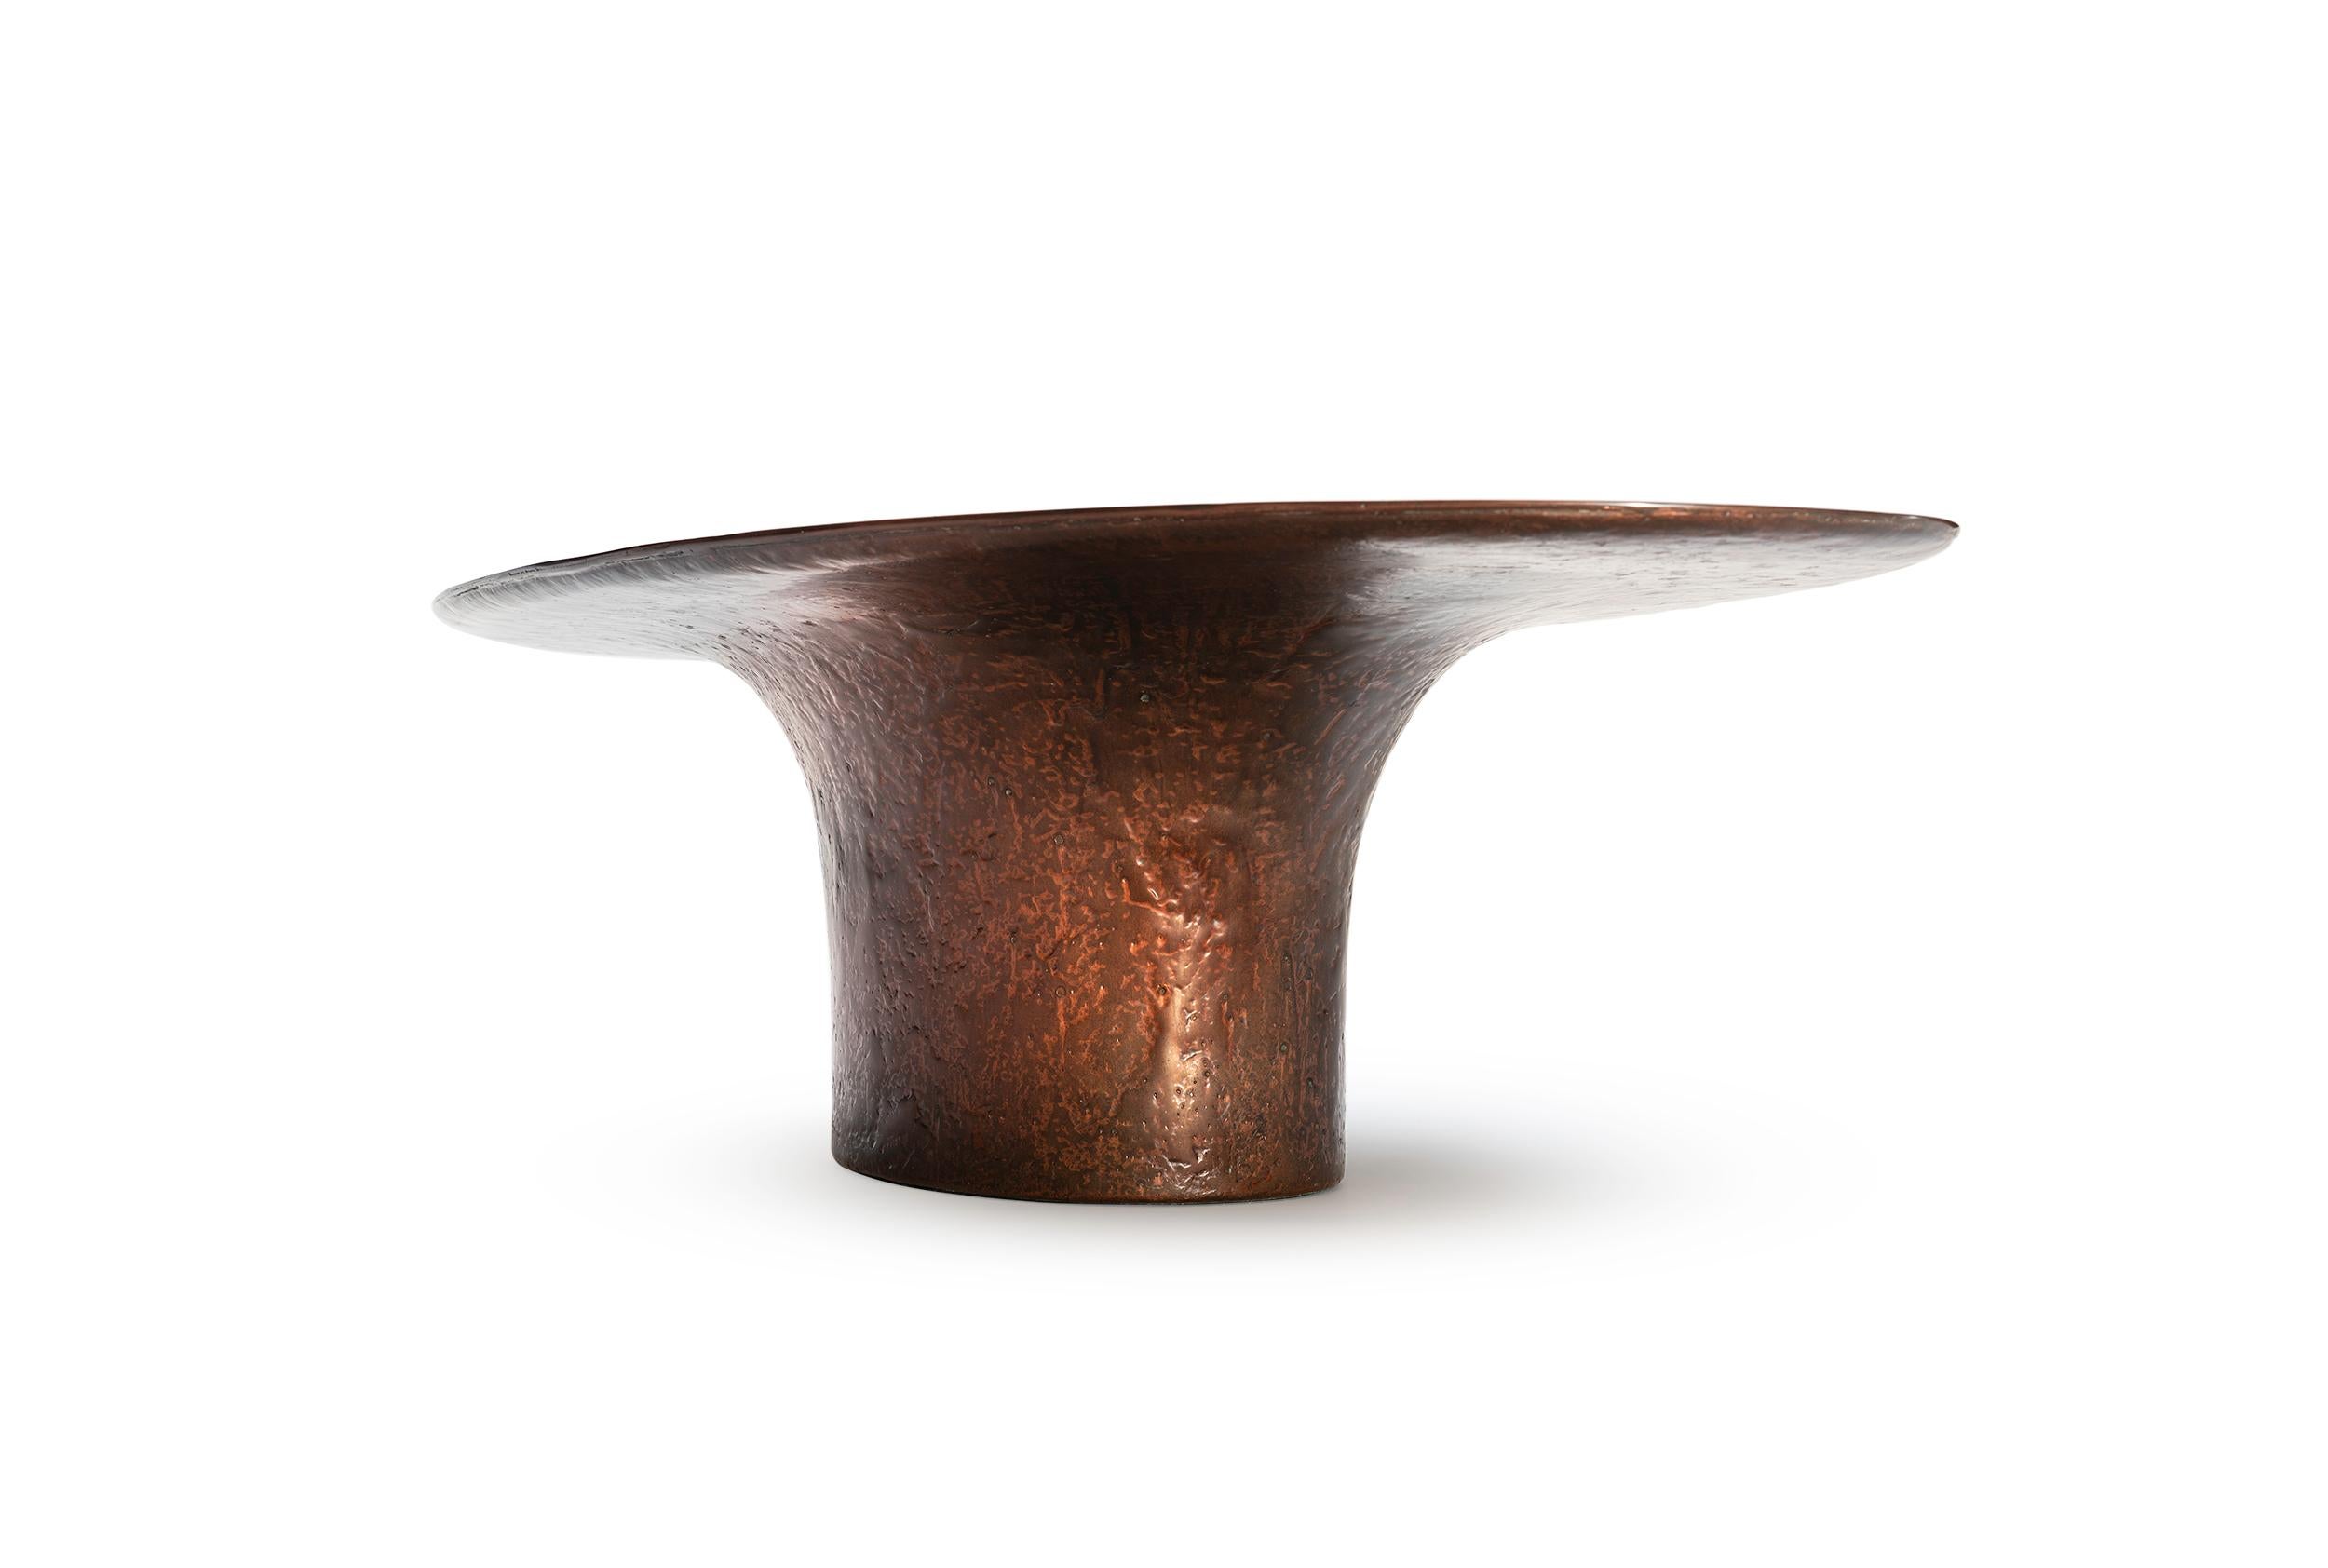 NR Copper V1 -21st Century Contemporary Sculptured Liquid Copper Oval Coffee Table

Born from cast liquid copper, the NR copper version could be easily associated with a sculpture and an object of art. Rough, authentic, and strong - an accidental